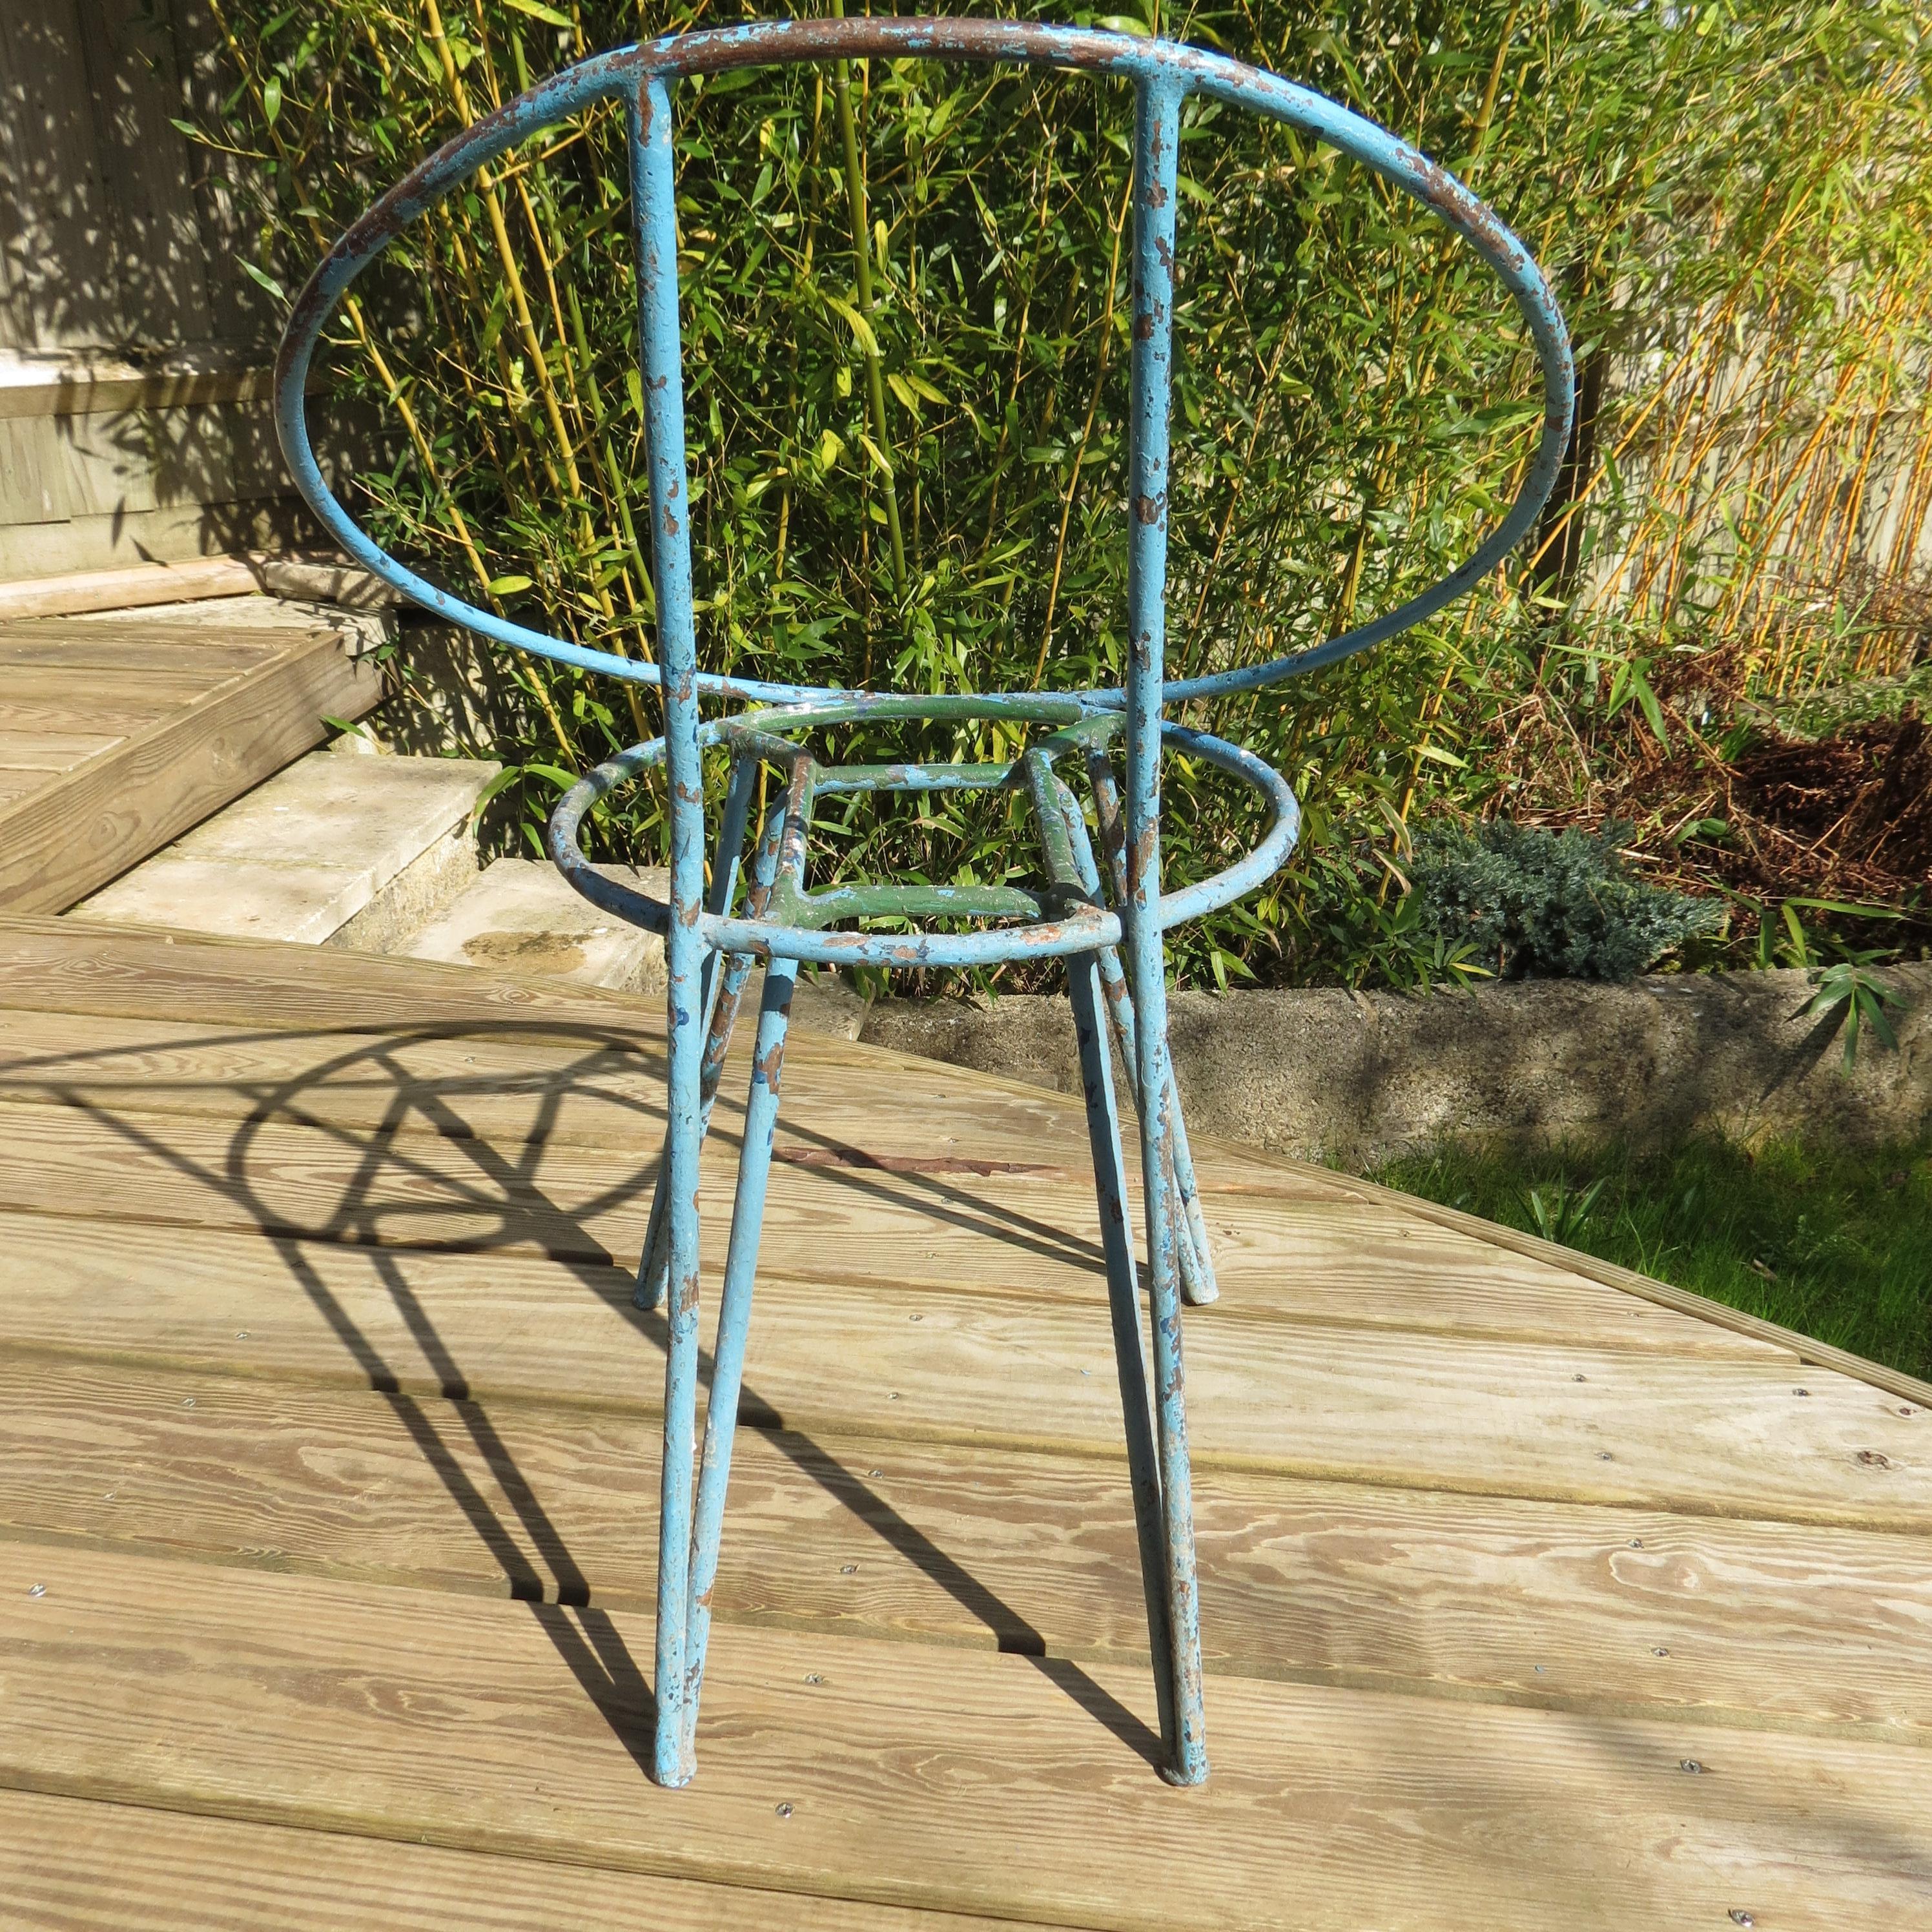 Machine-Made Set of 4 Midcentury Blue Patinated Metal Garden Chairs from the 1950s